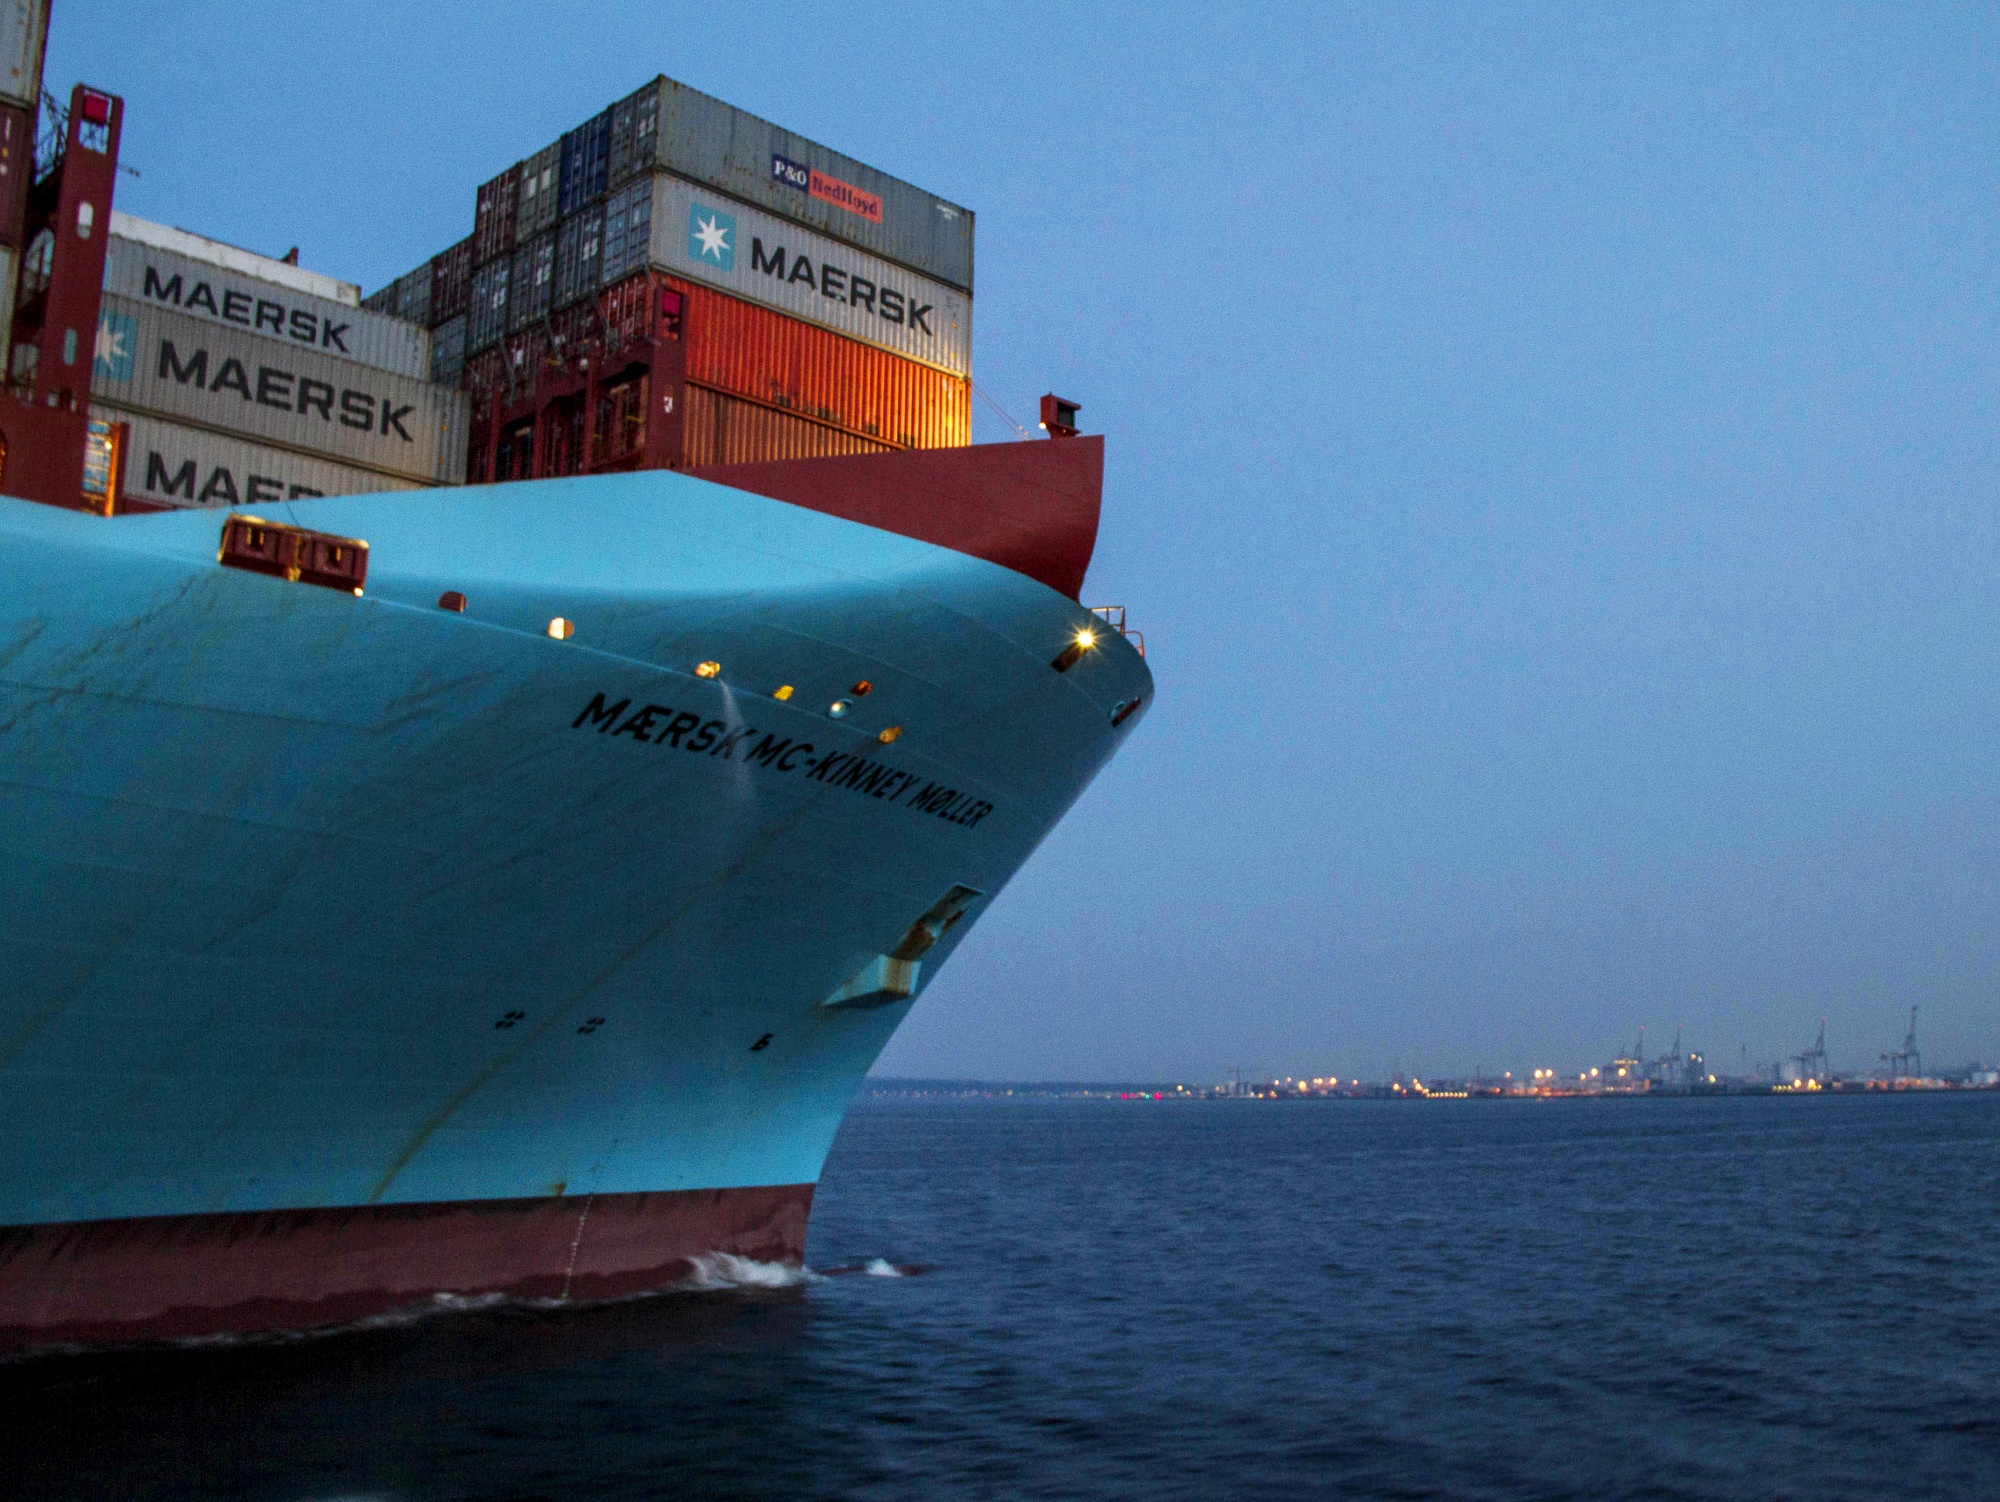 Shipping containers stand aboard the Maersk Mc-Kinney Moller Triple-E Class container ship,&nbsp;as it arrives at the port of Aarhus, Denmark.